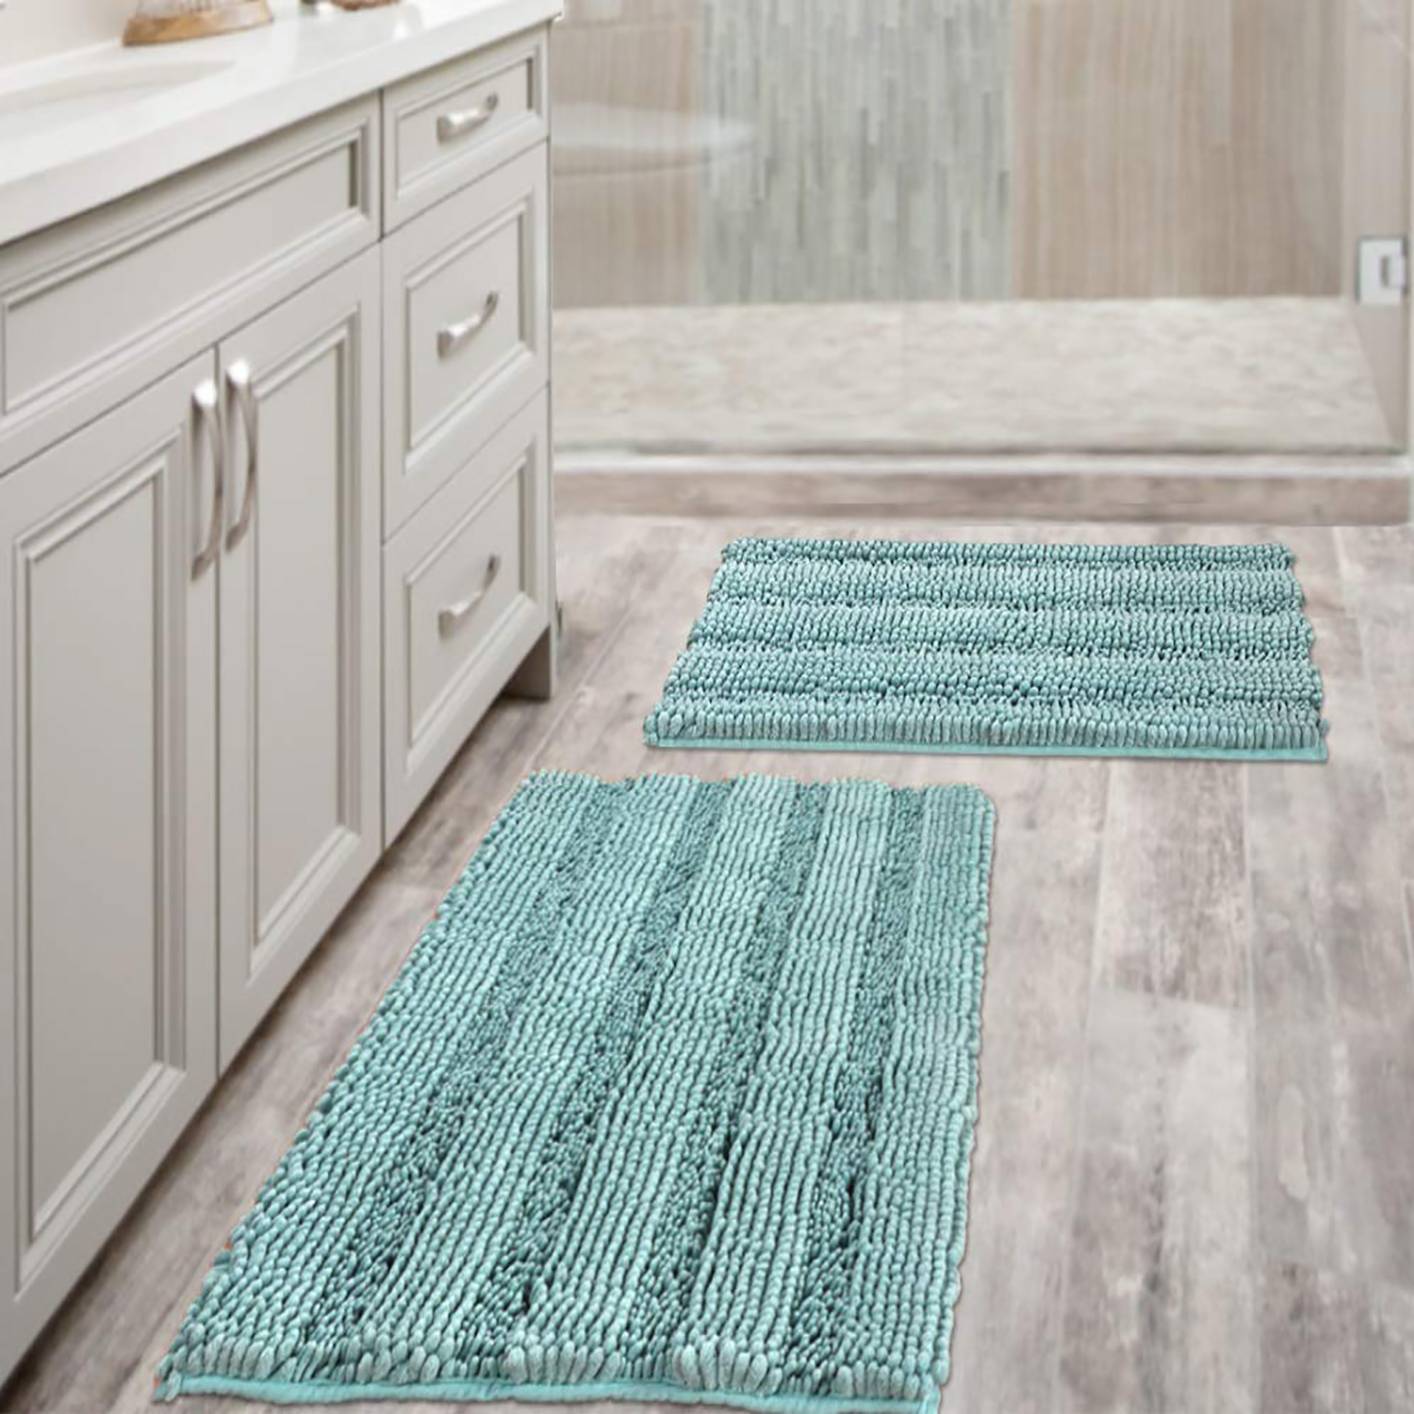 Bathroom Extra Soft and Absorbent - Striped Bath Rugs Set for Indoor/Kitchen (Set of 2 - 20" x 32"/17" x 24")